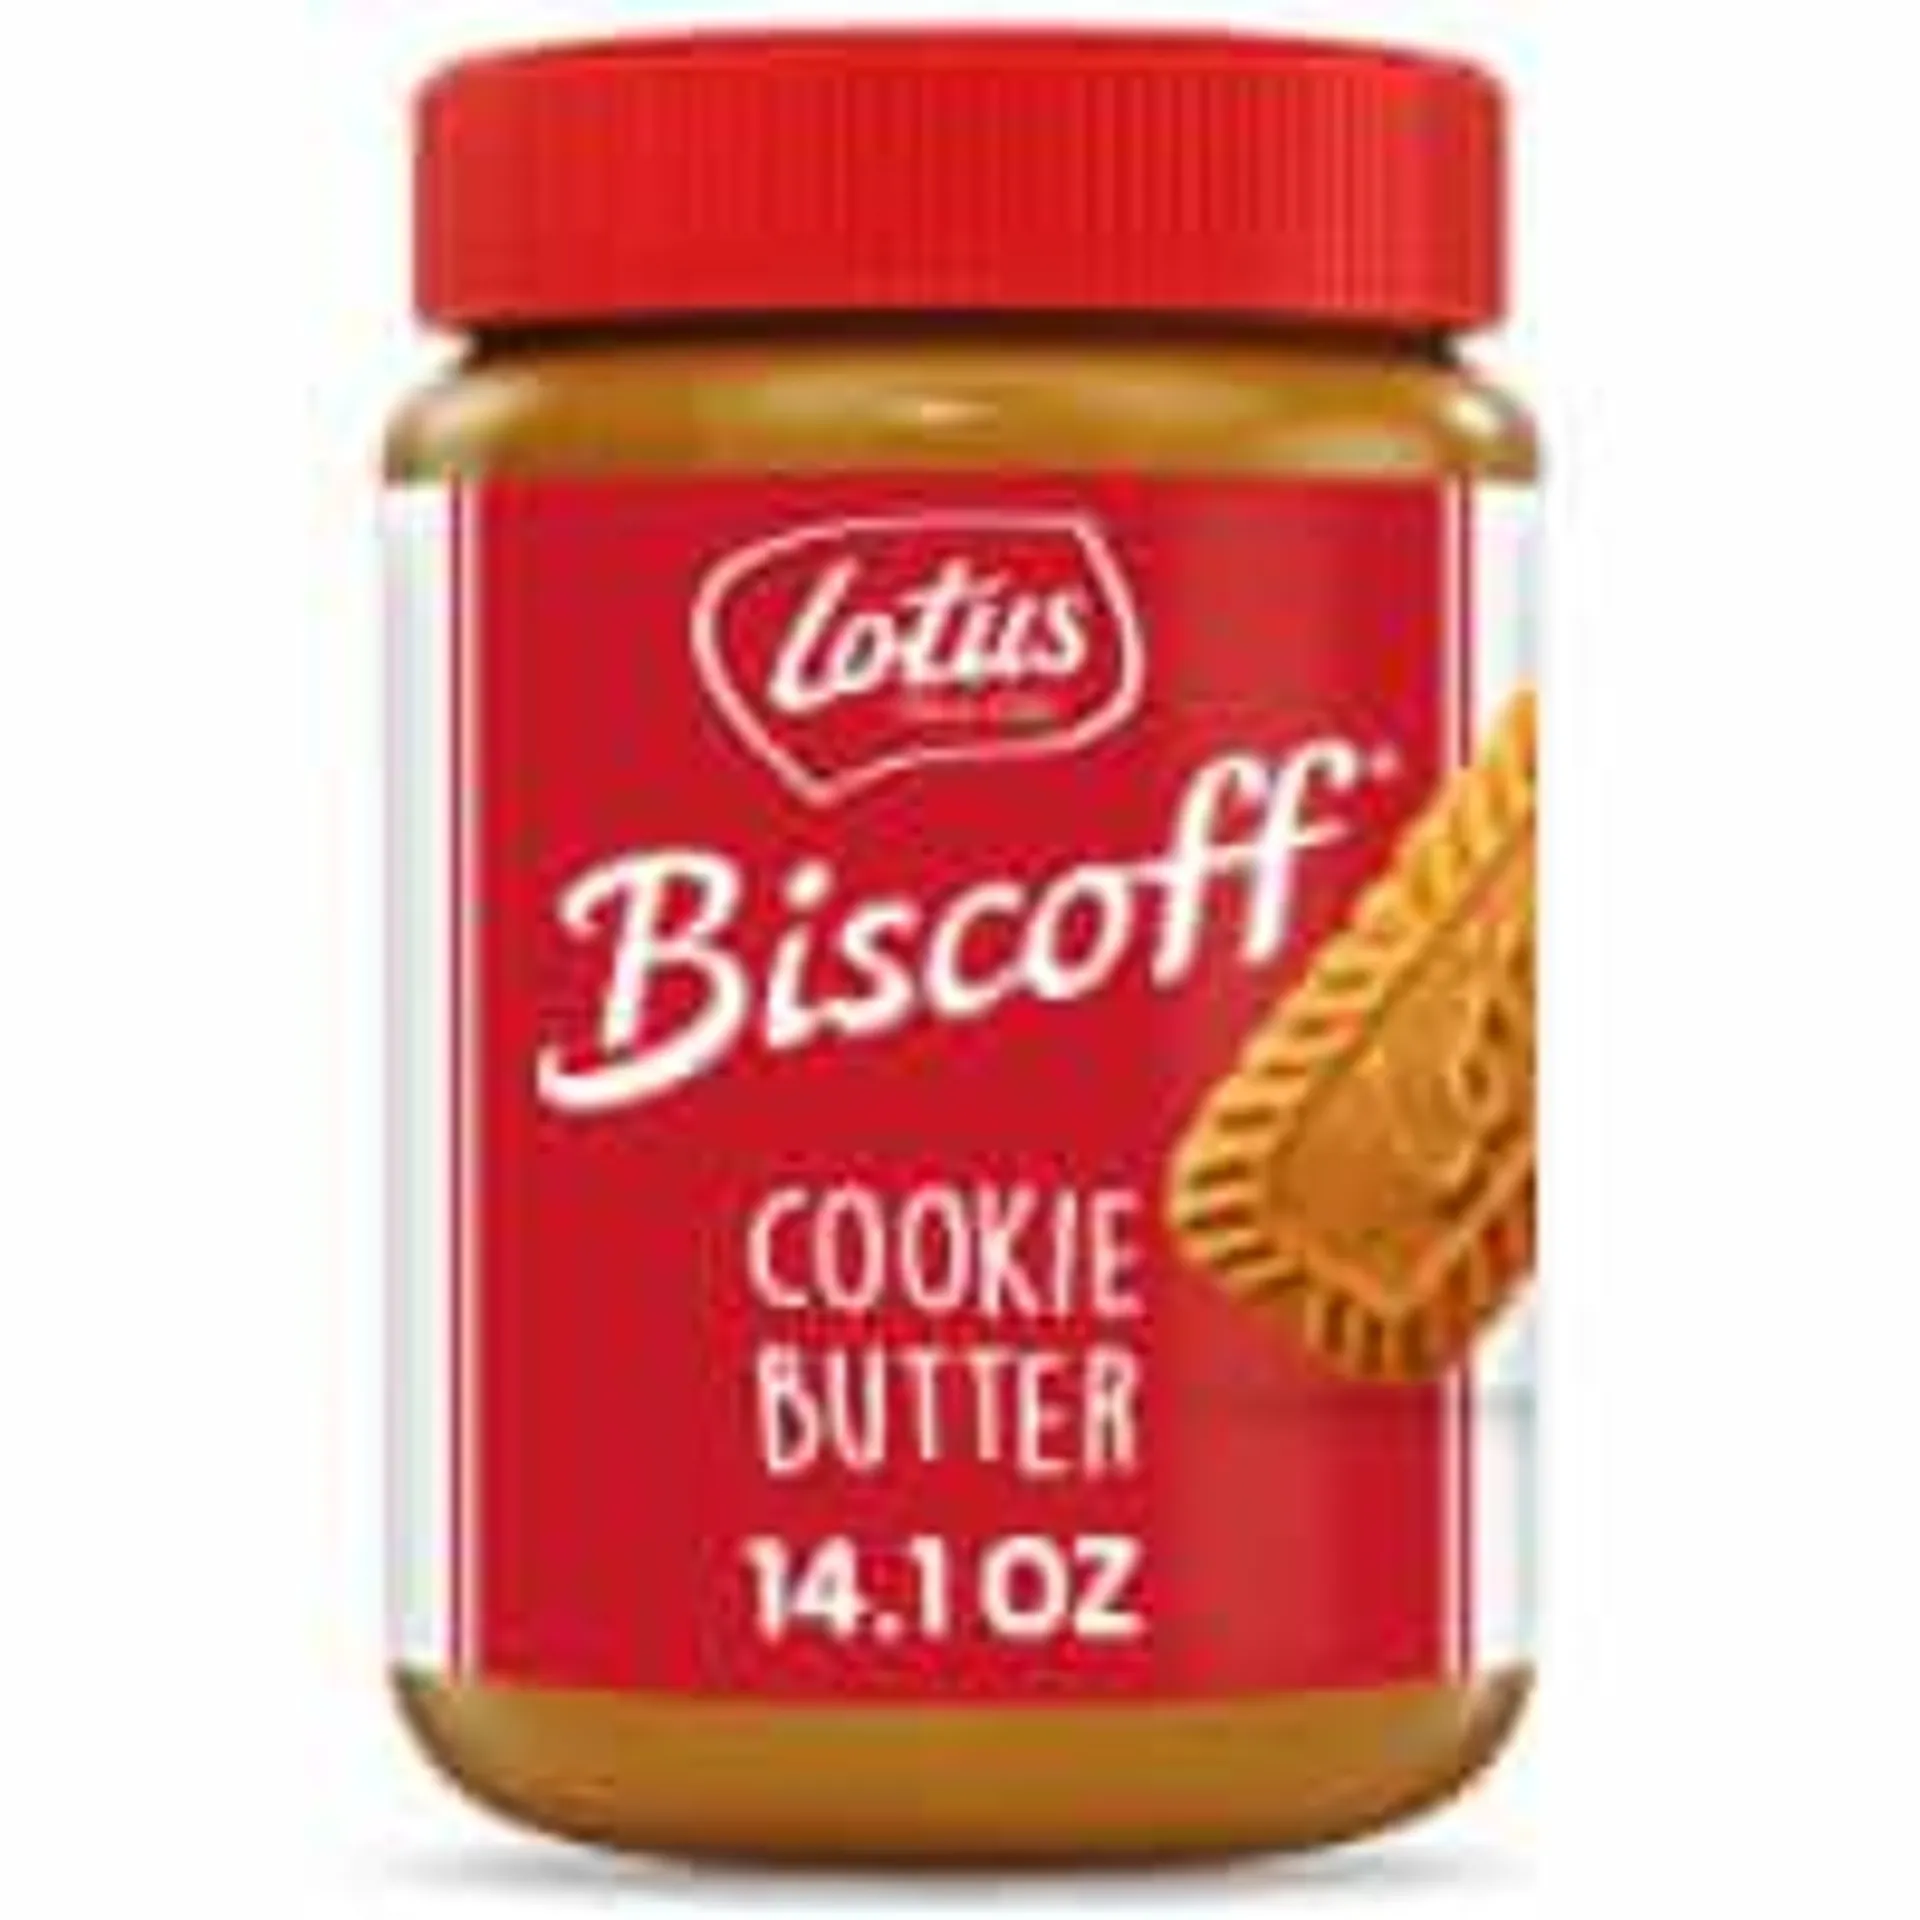 Lotus Biscoff Cookie Butter